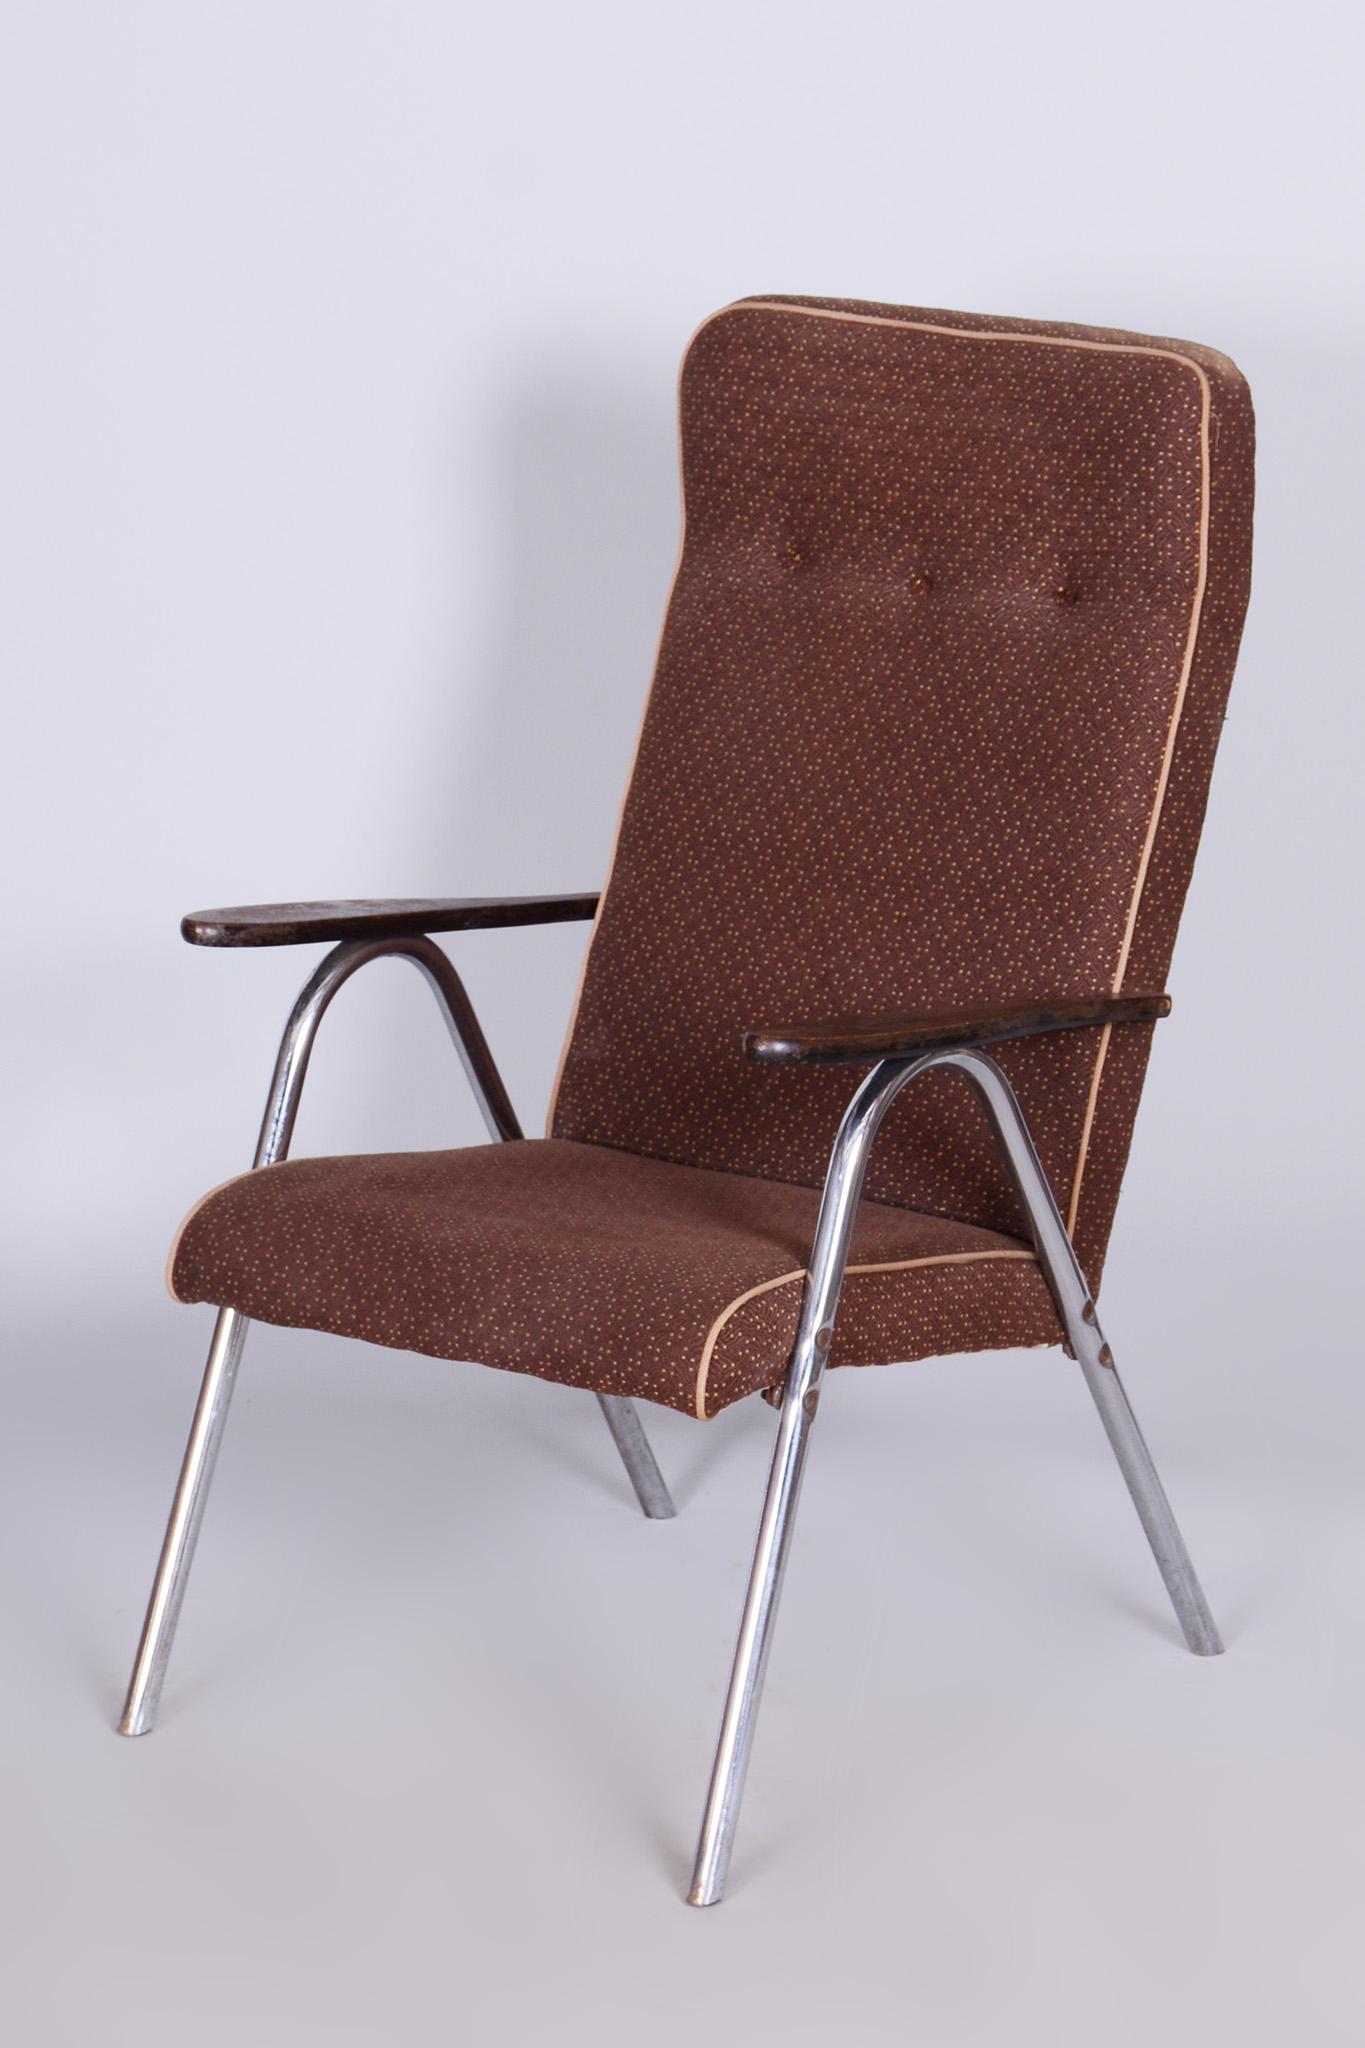 Original Bauhaus Armchair, Very Well Preserved Condition, Czechia, 1940s For Sale 4